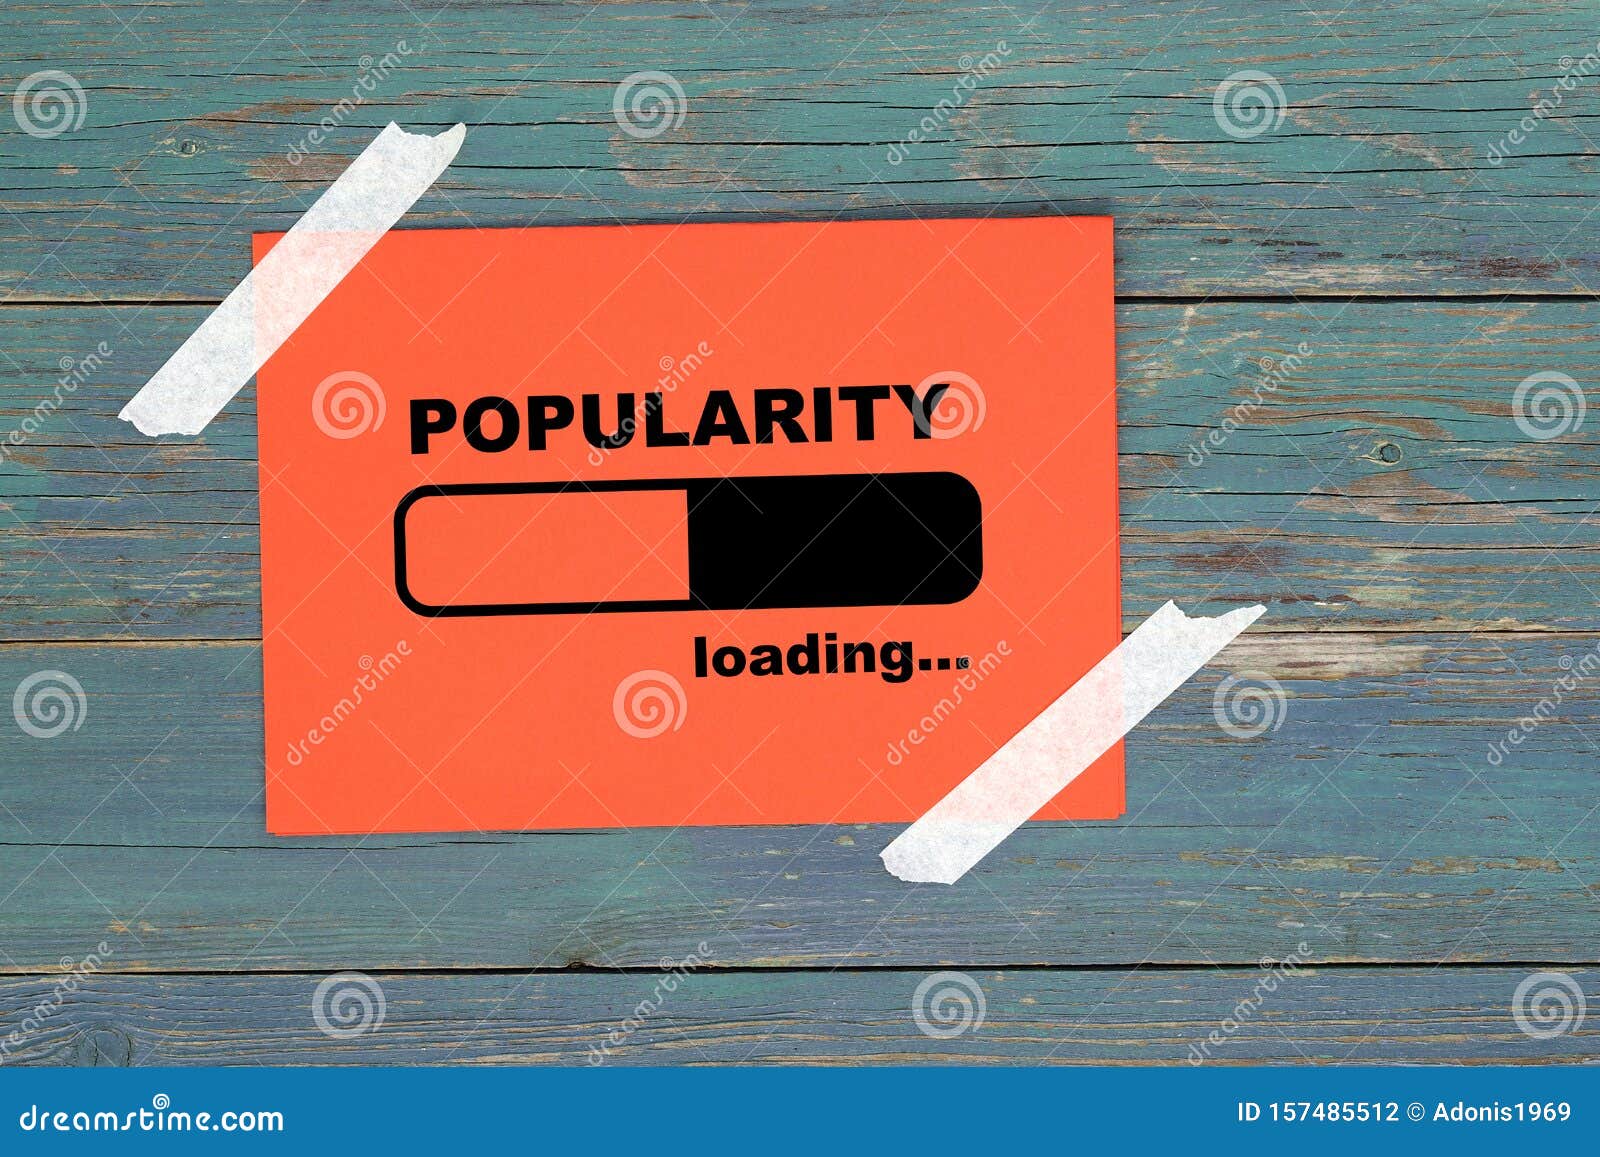 popularity loading on paper